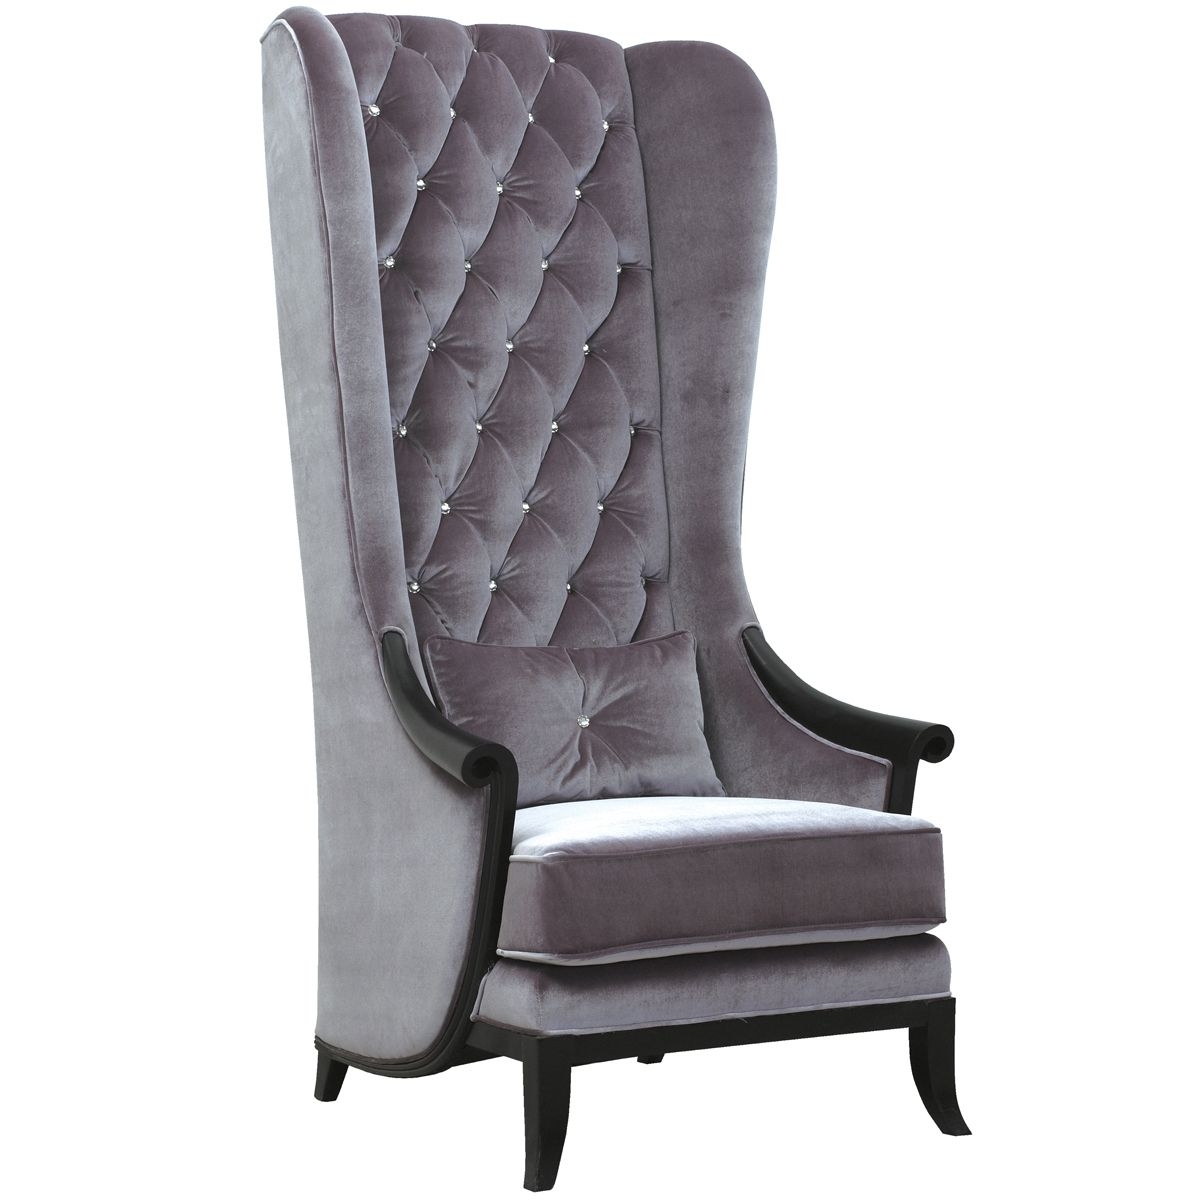 High wing back chairs